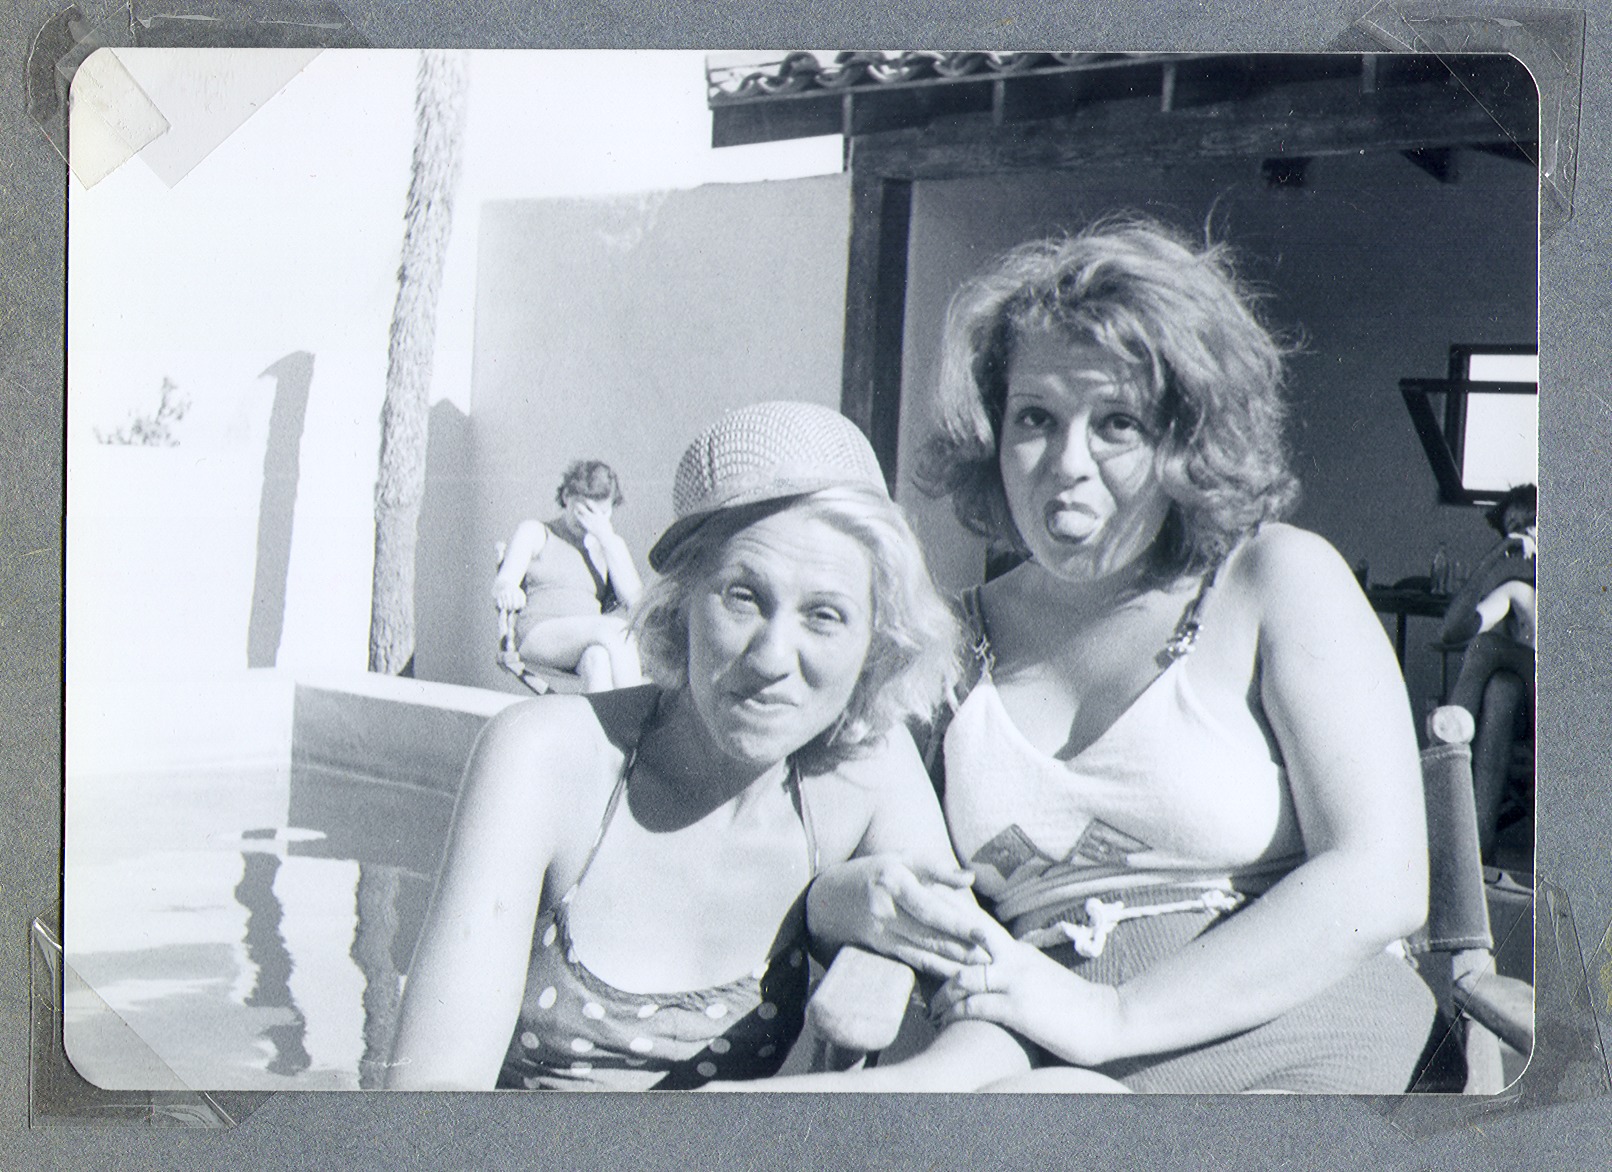 Clara and Carmen Schmidt by the pool: photographic print